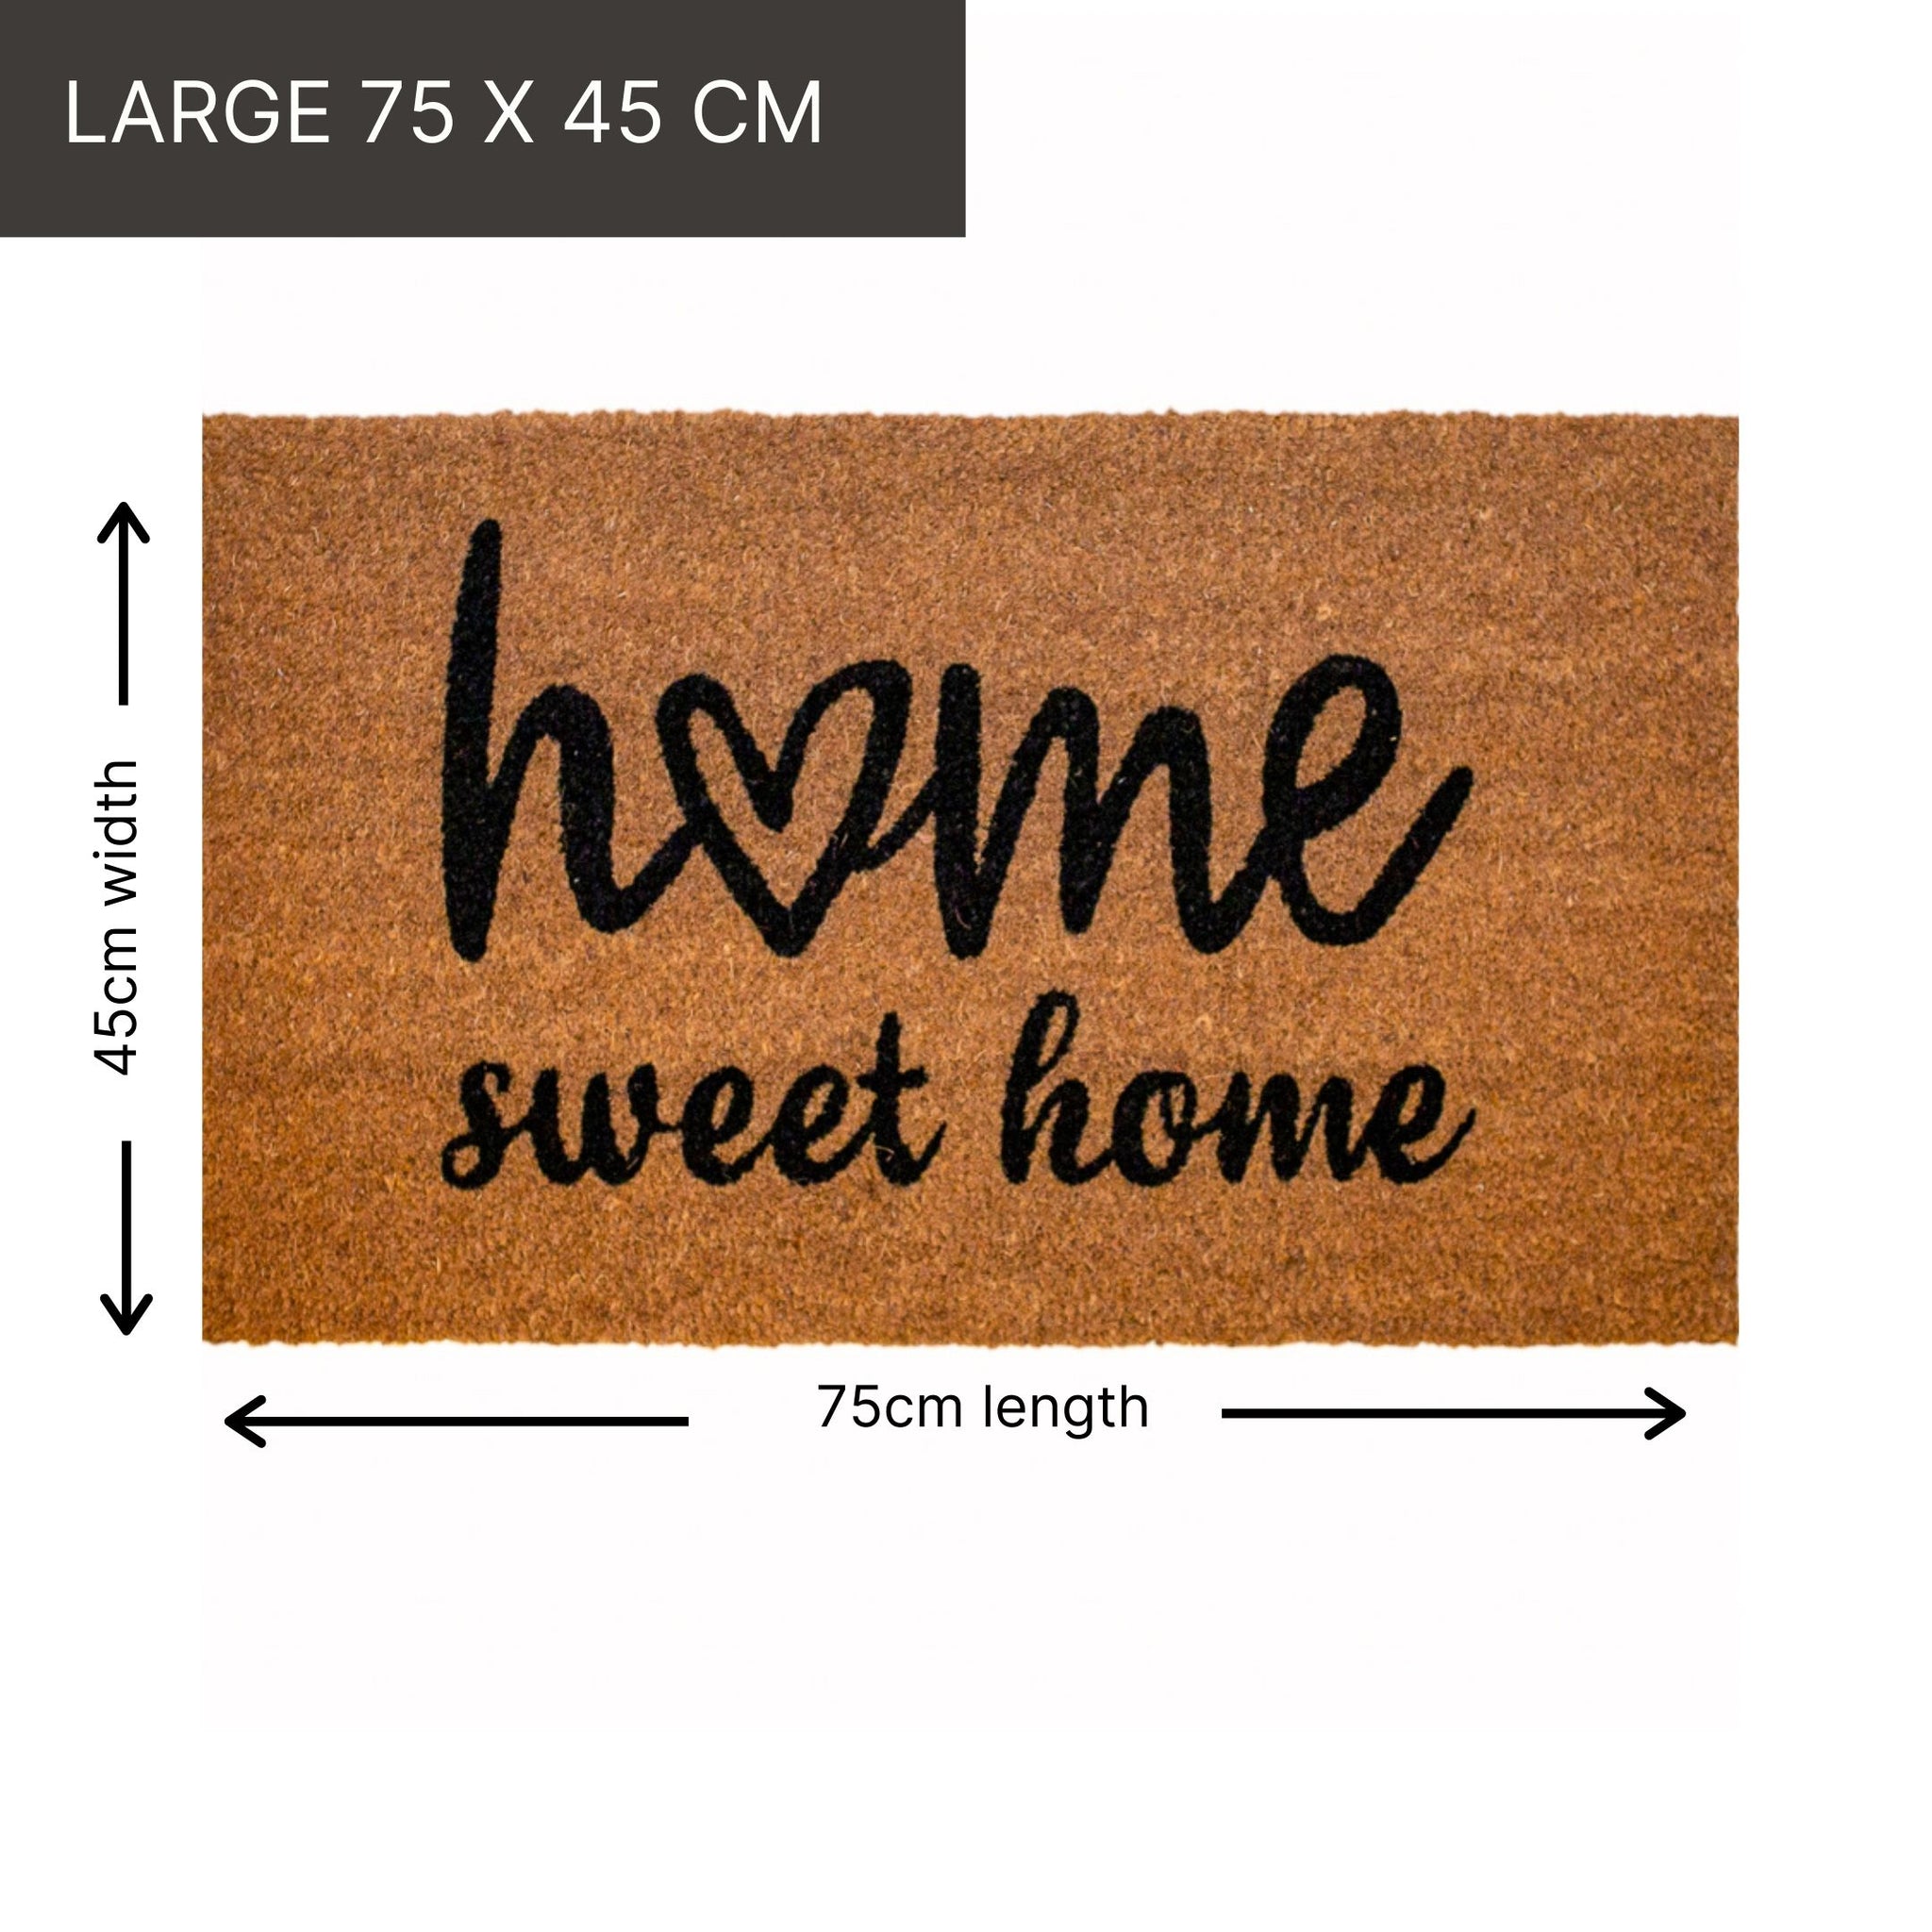 Stibadium Home Sweet Home Door Mat 30x17 Inches, Welcome Home Mats for  Front Door, Farmhouse Welcome Mat with Thick Anti-Slip PVC Backing, Coir Mat,  Welcome Mat for Entryway 